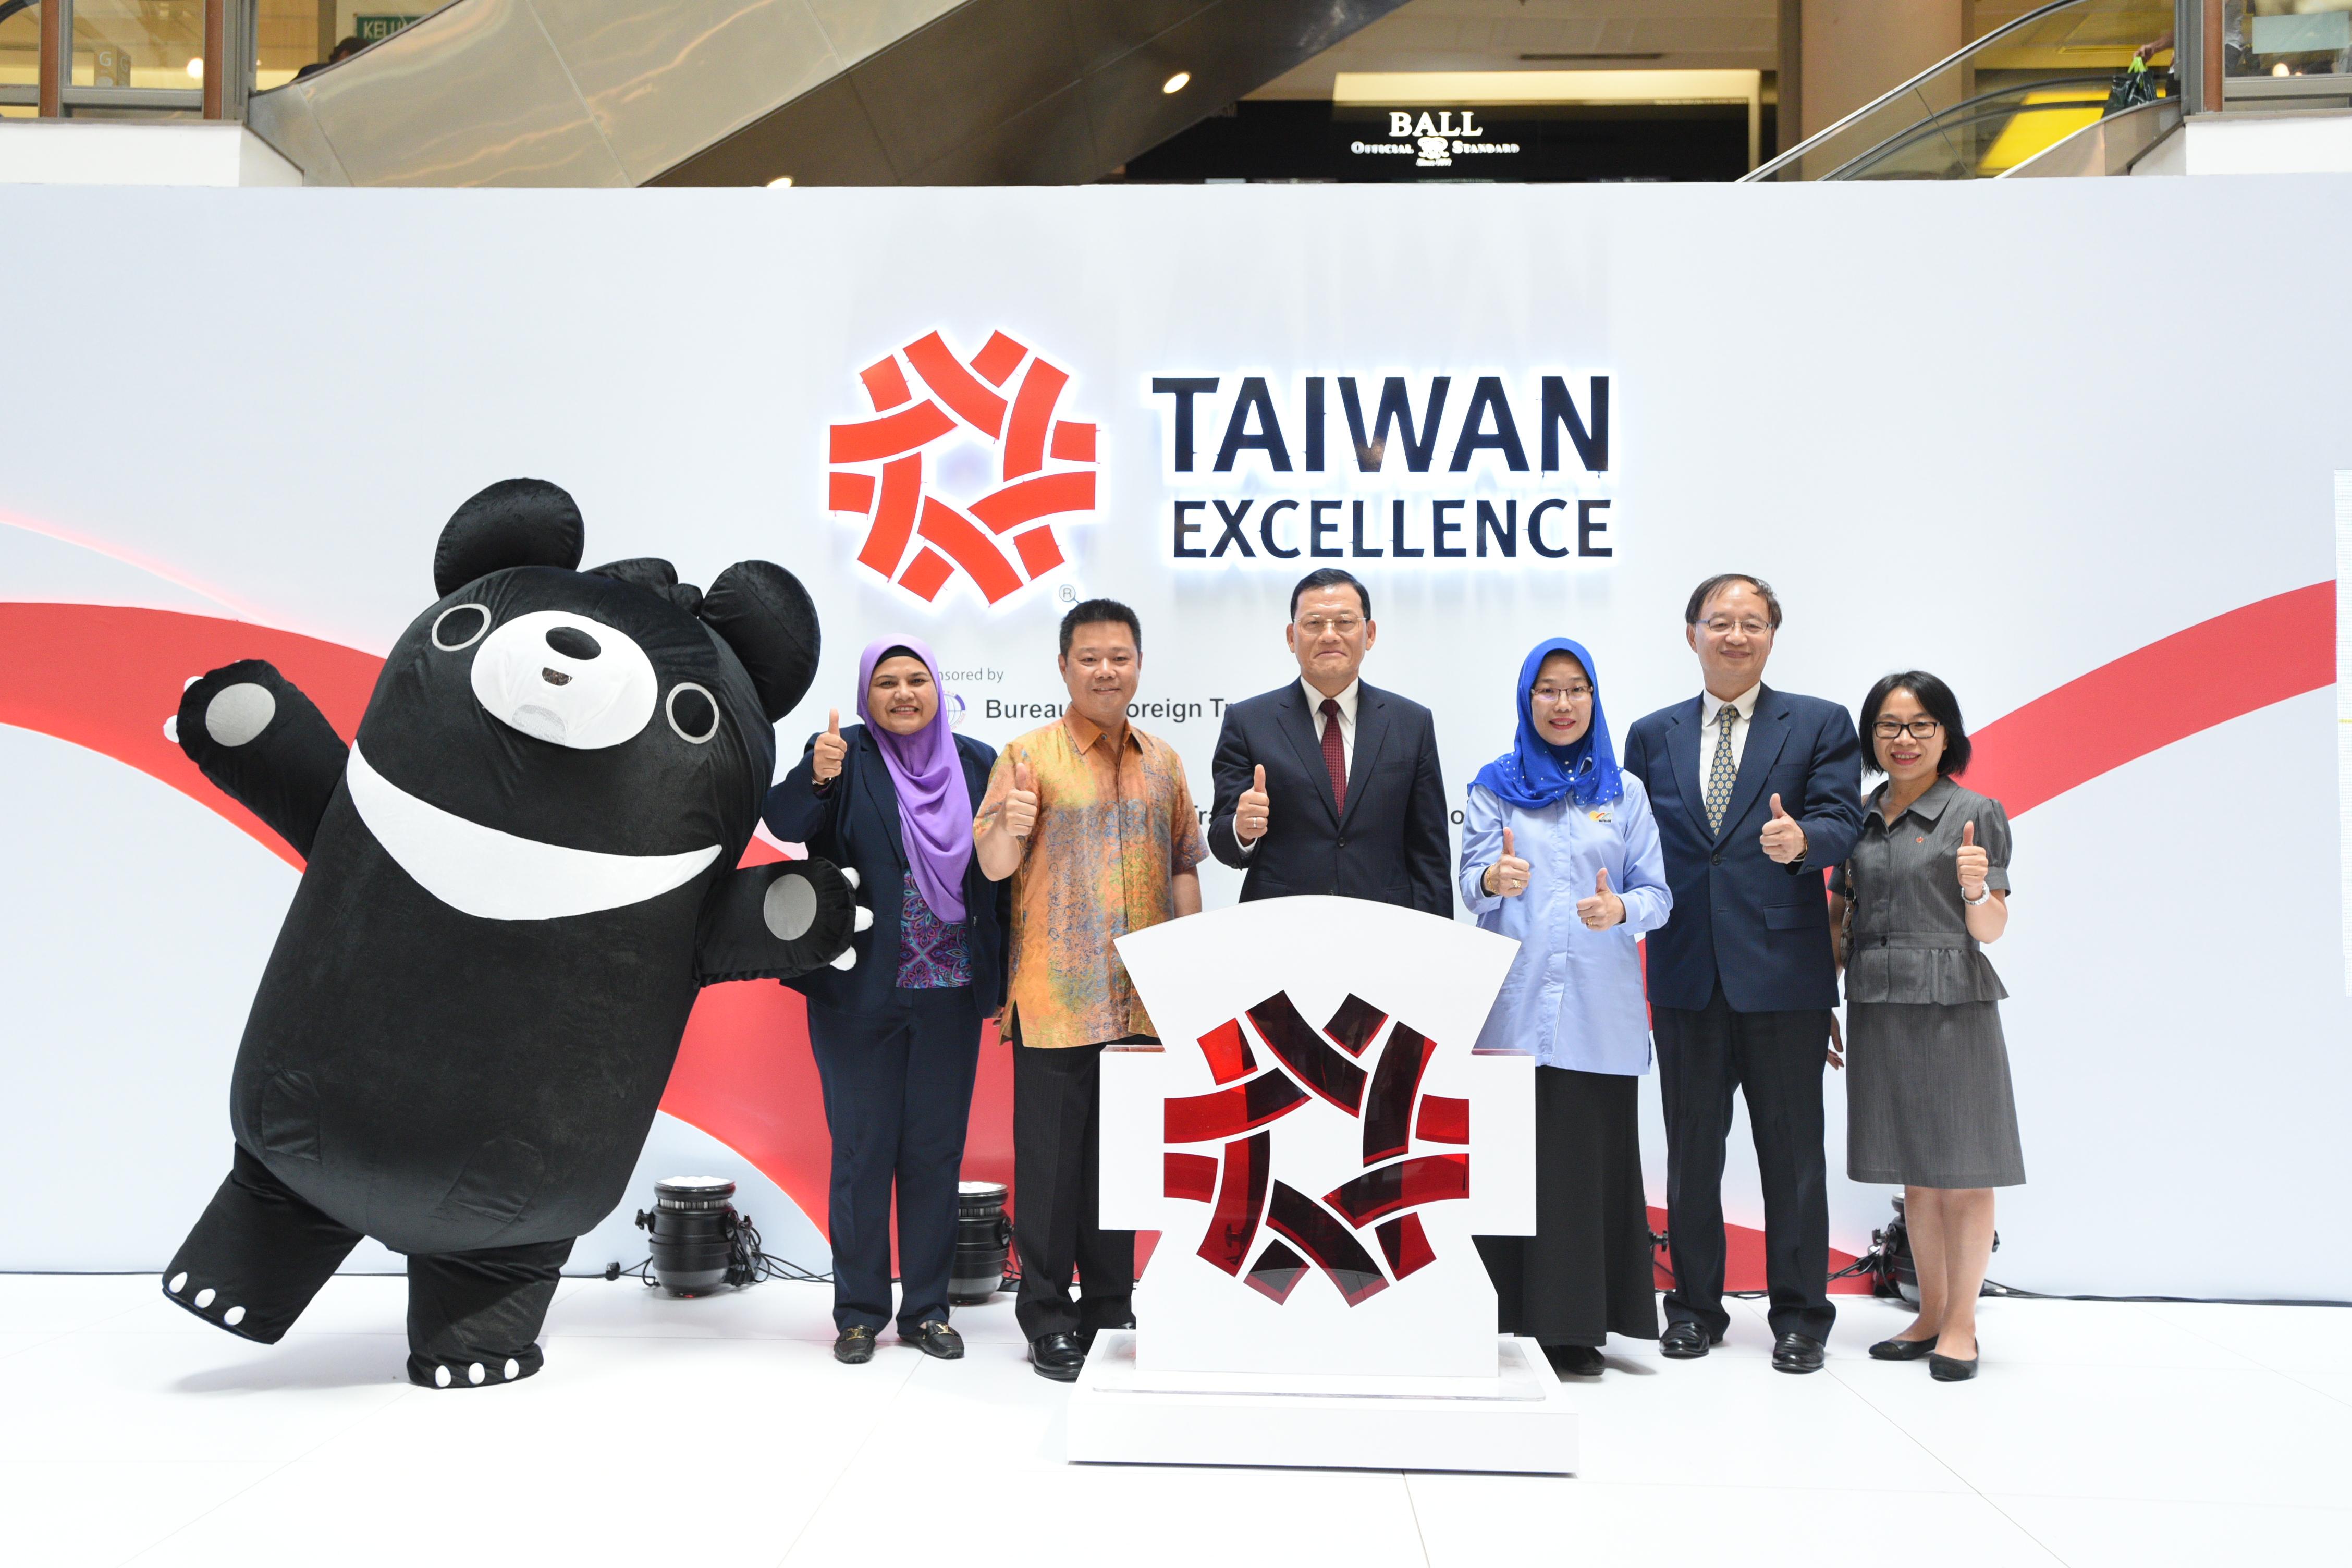  Representative Chang, James Chi-ping (left 3) attends the Officiation Ceremony of Taiwan Excellence Pavilion at One Utama Shopping Centre on July 13, 2017